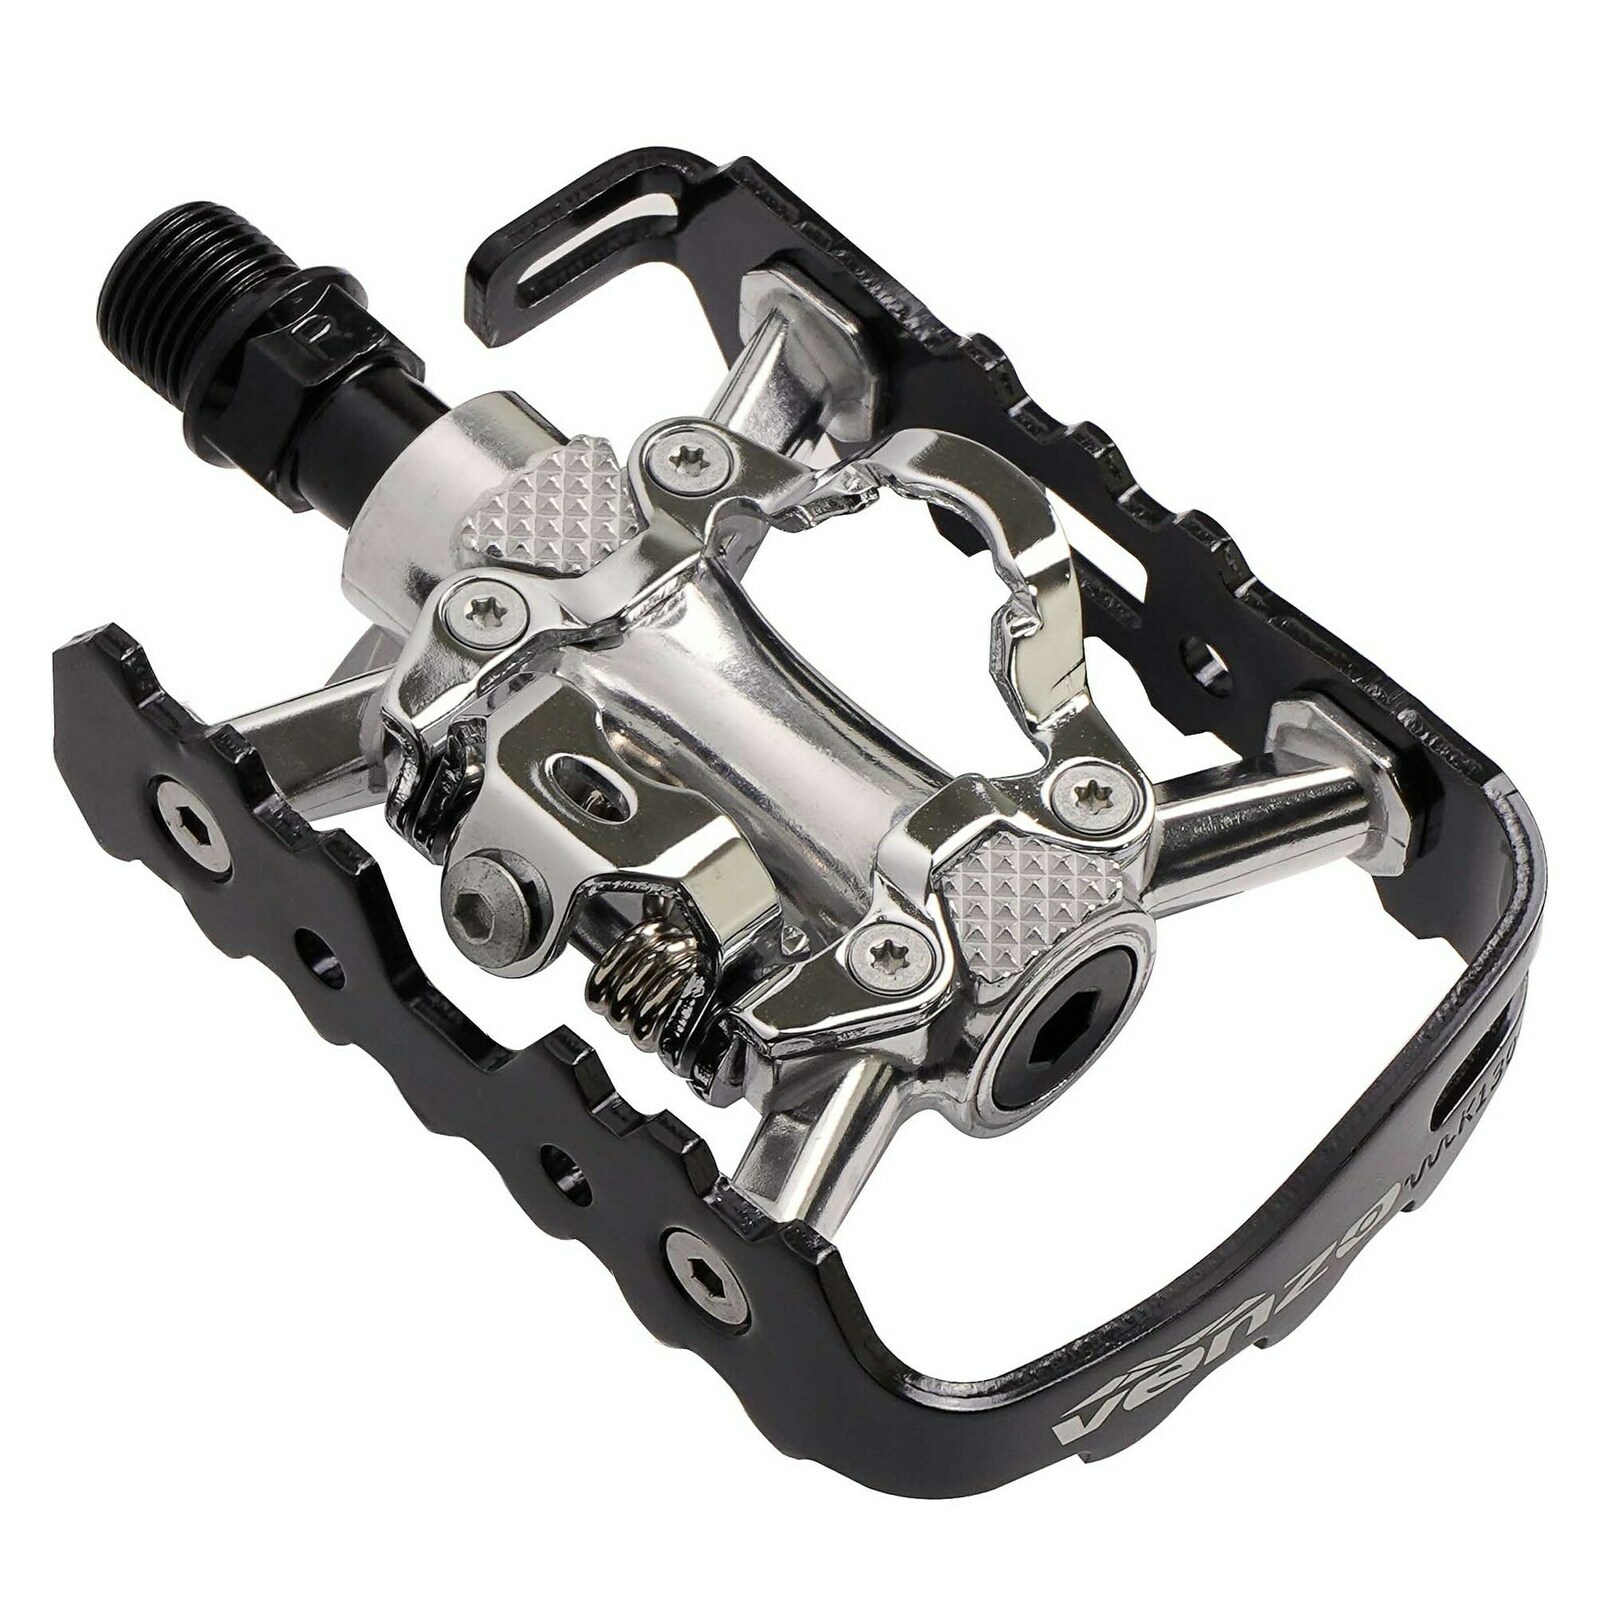 Wellgo Multi-Function Mountain Bike Sealed Pedals Shimano SPD Compatible Black